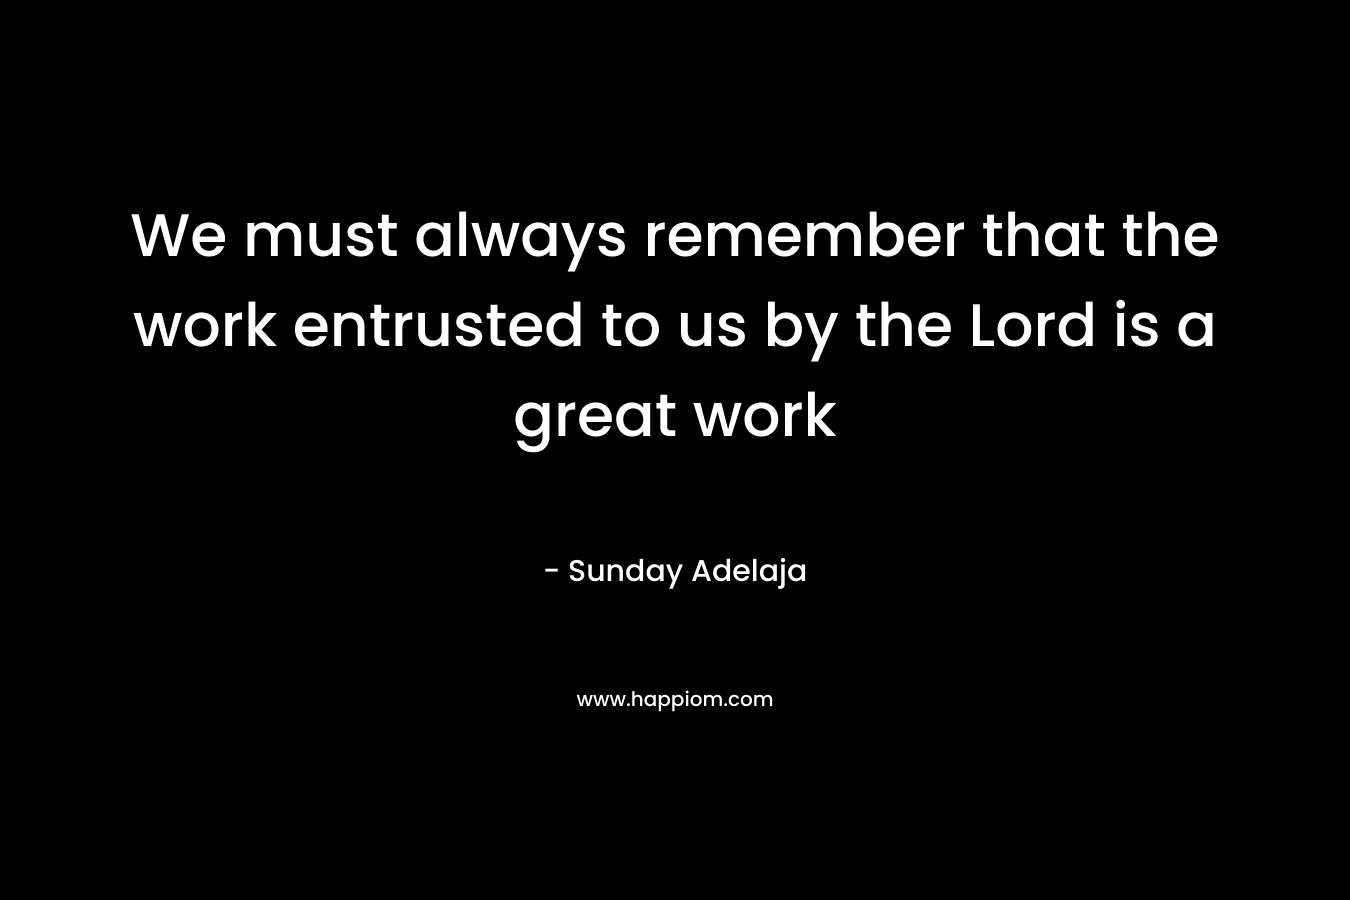 We must always remember that the work entrusted to us by the Lord is a great work